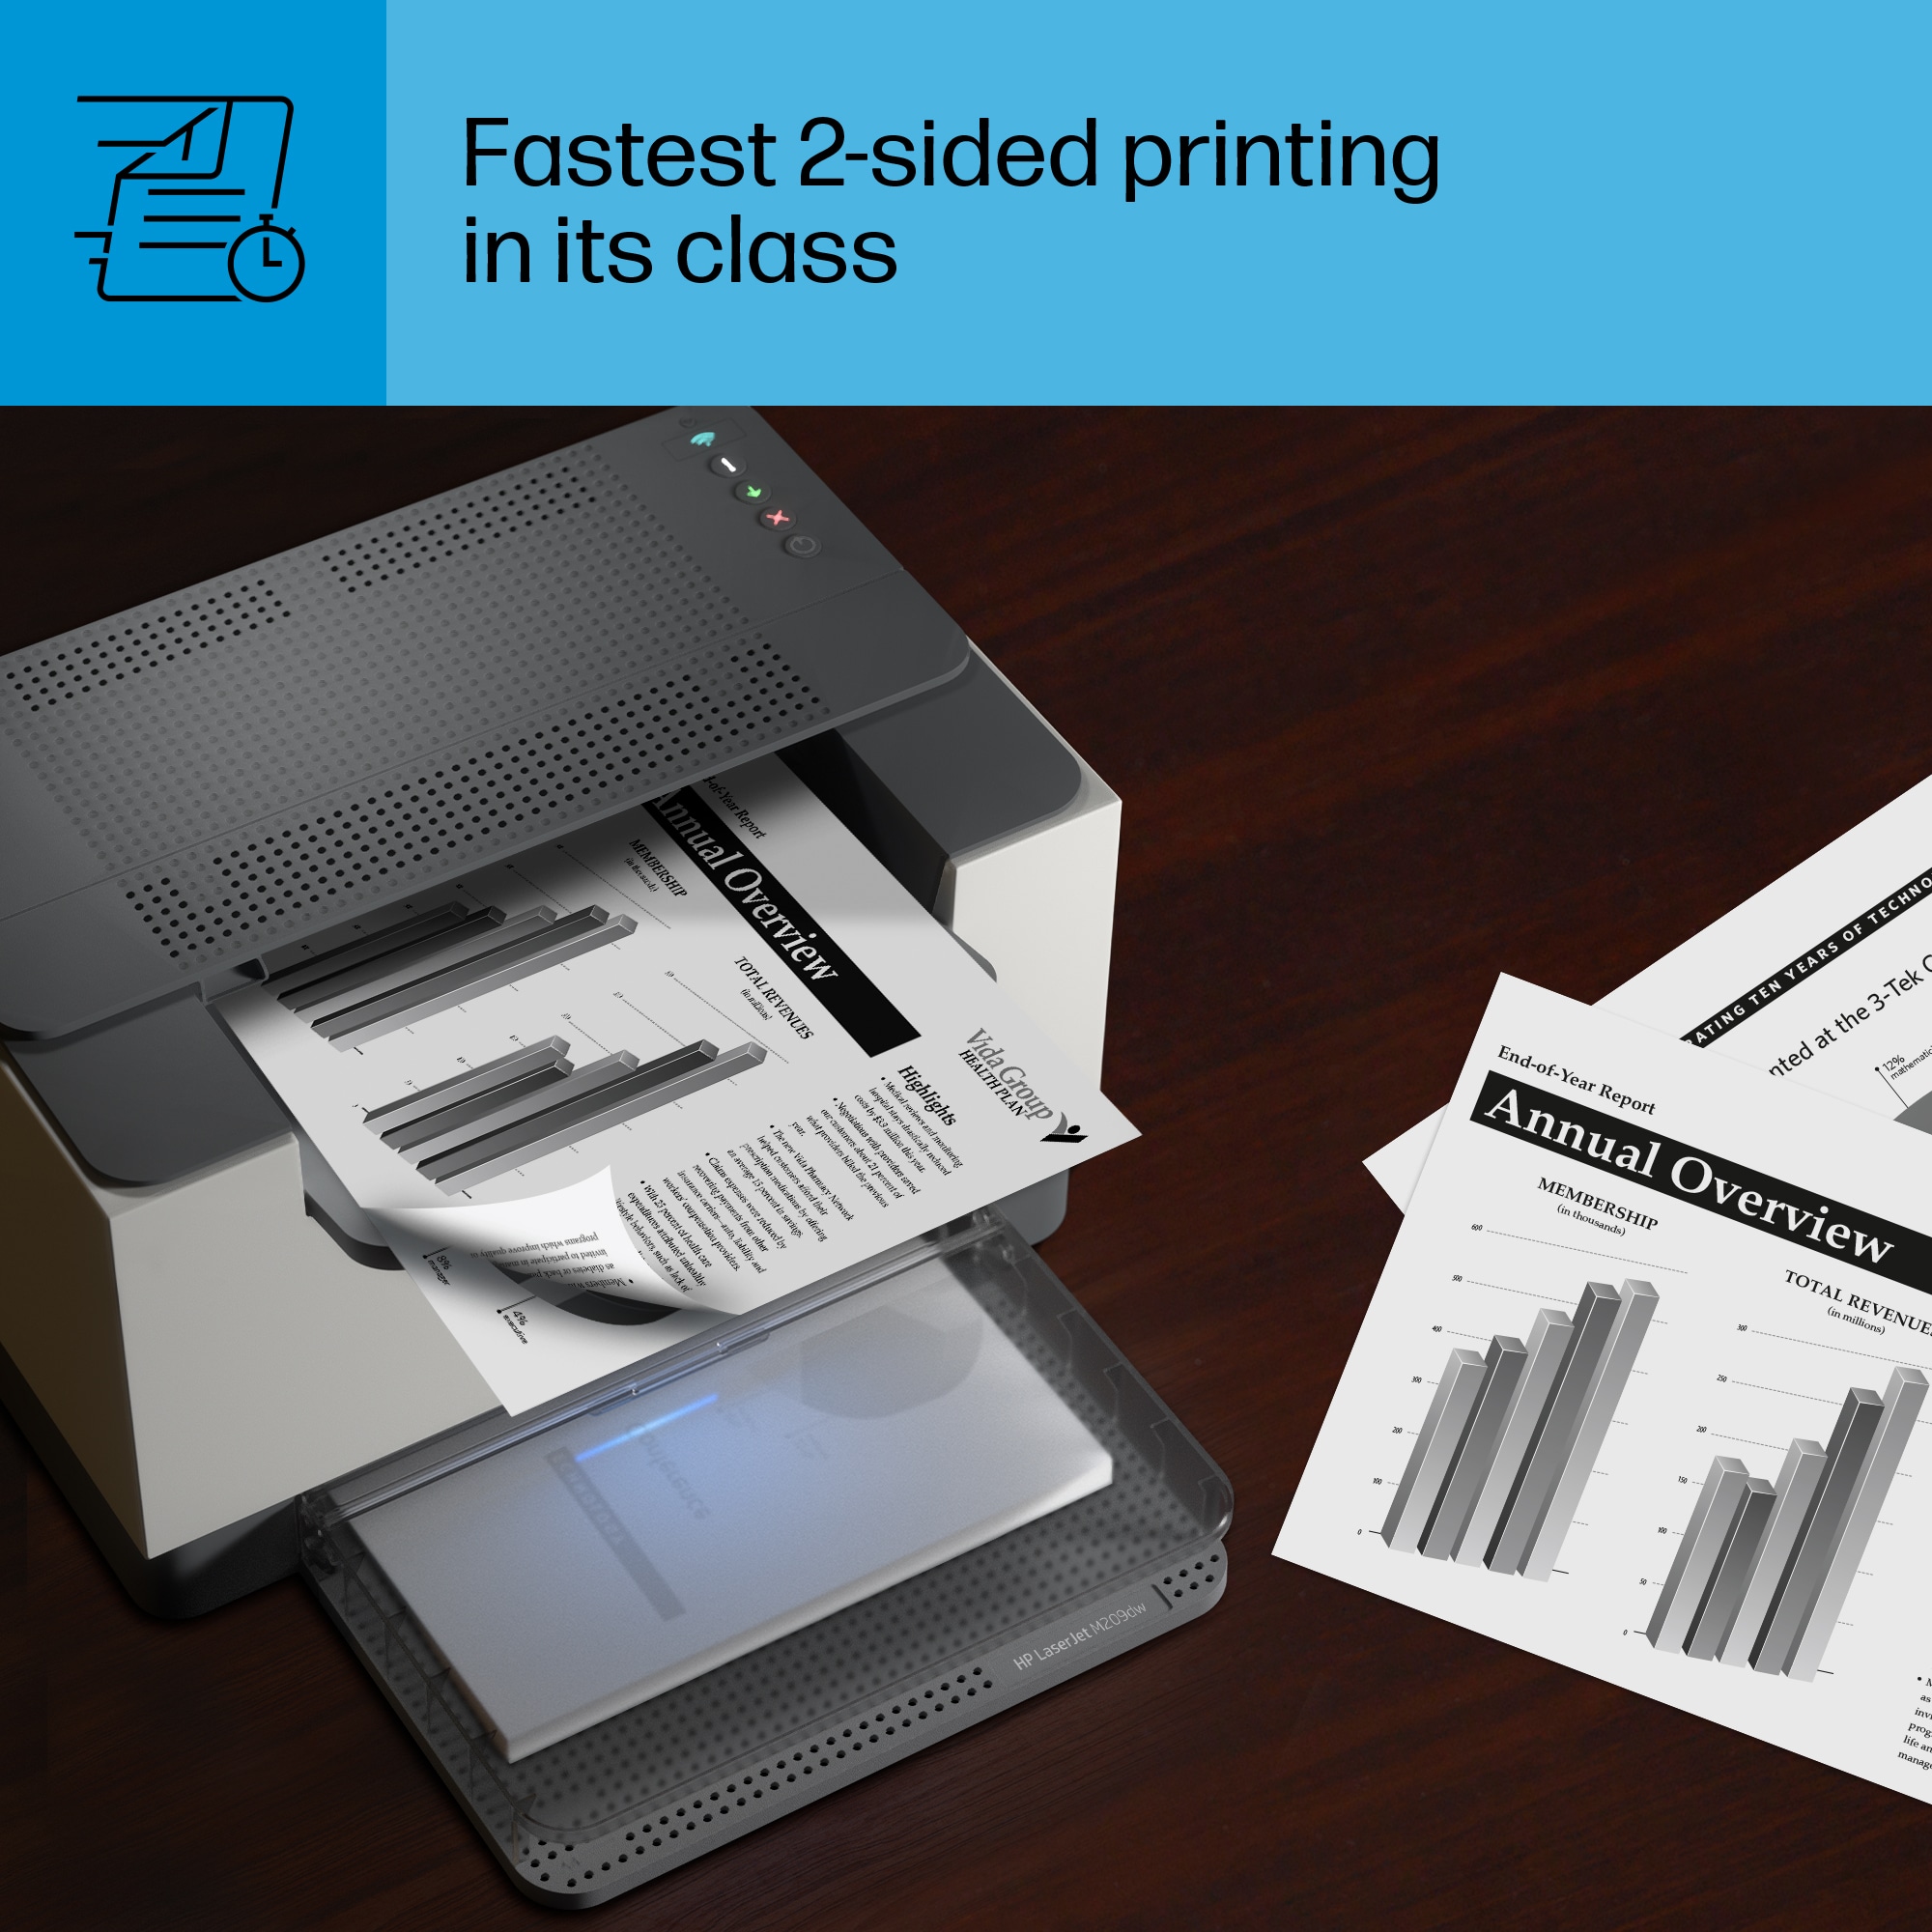 Fastest 2-sided printing in its class